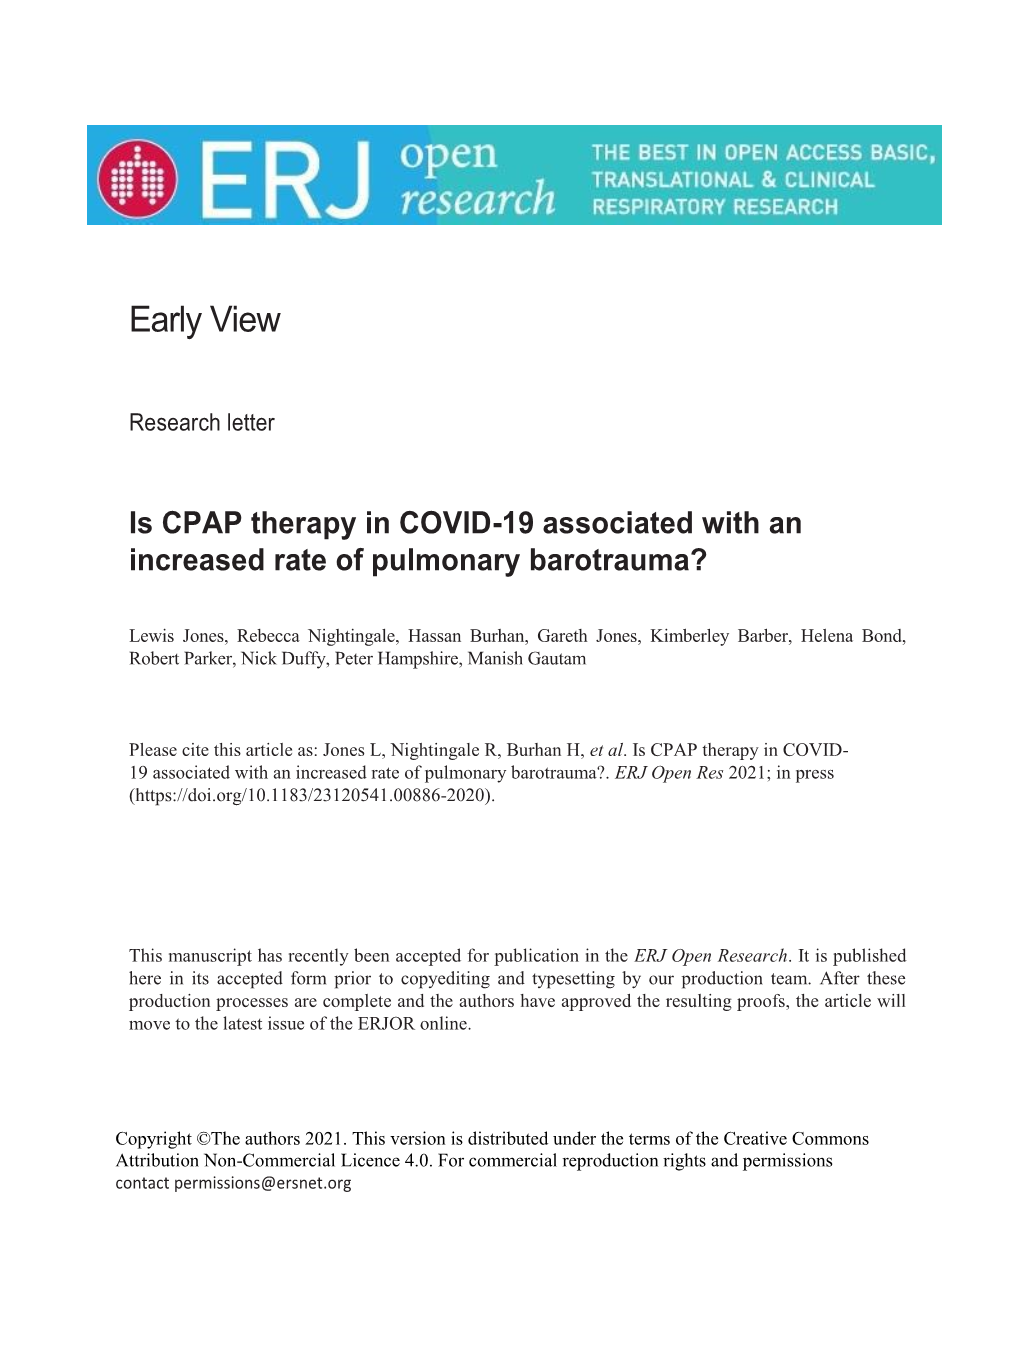 Is CPAP Therapy in COVID-19 Associated with an Increased Rate of Pulmonary Barotrauma?